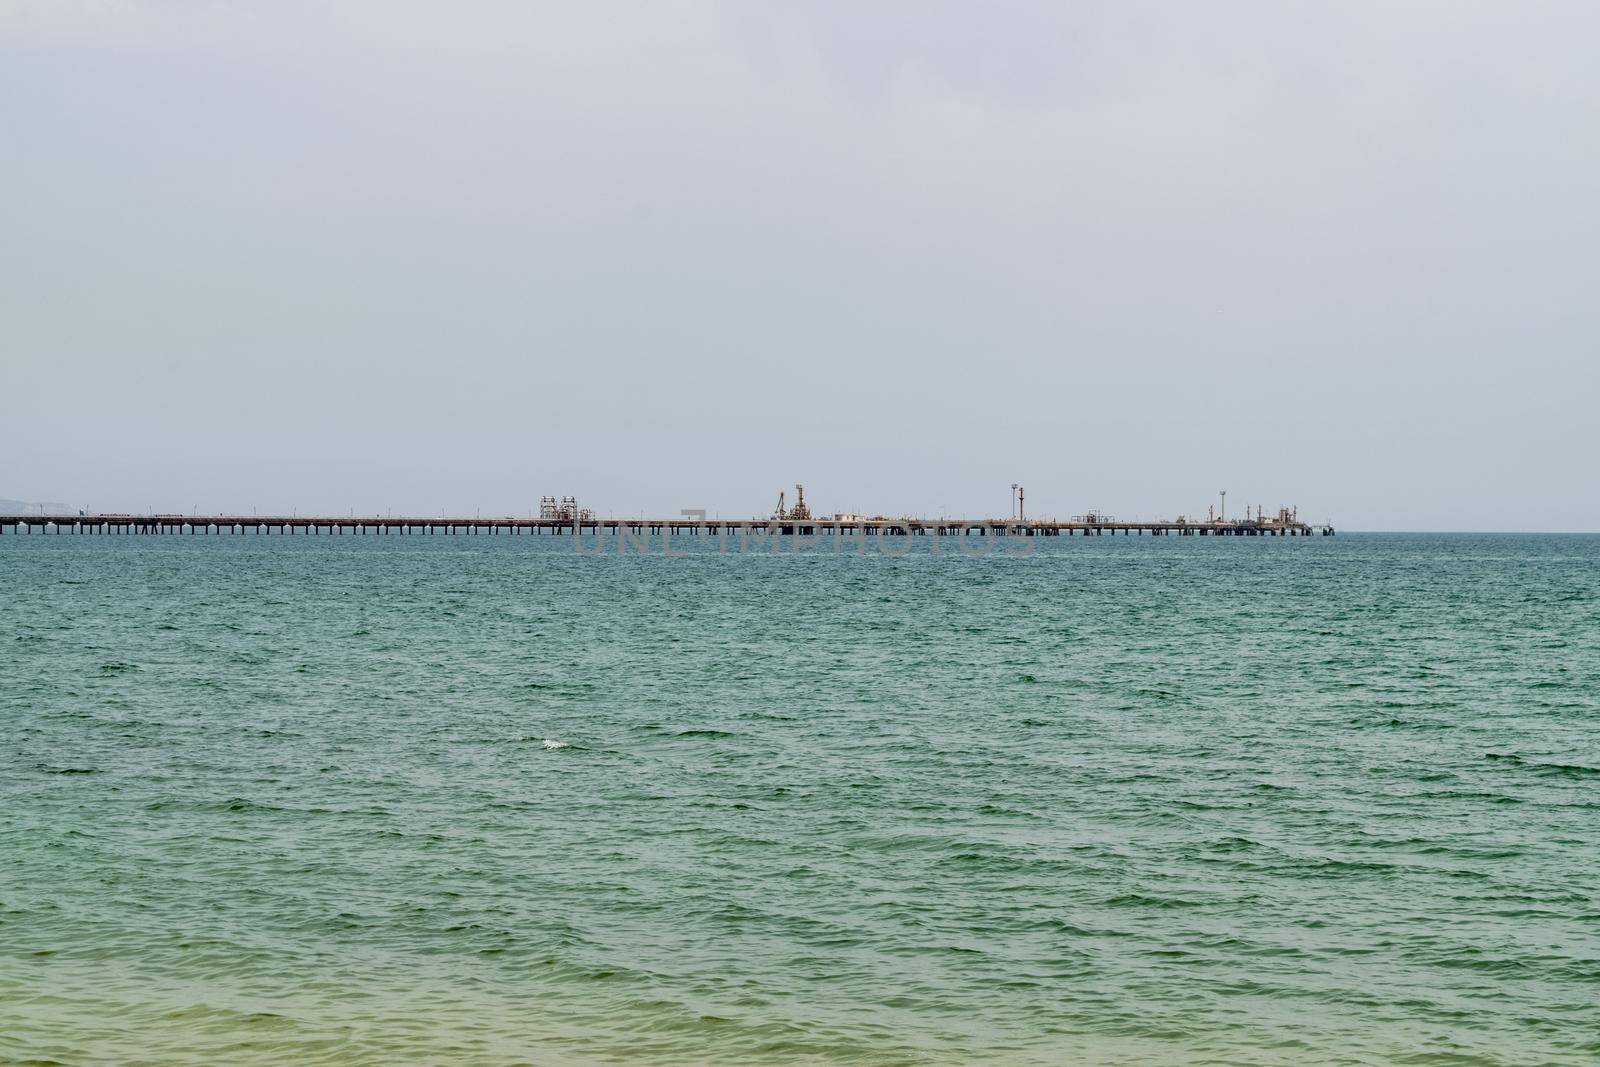 An oil pipeline and a dock for oil tankers. by silentstock639